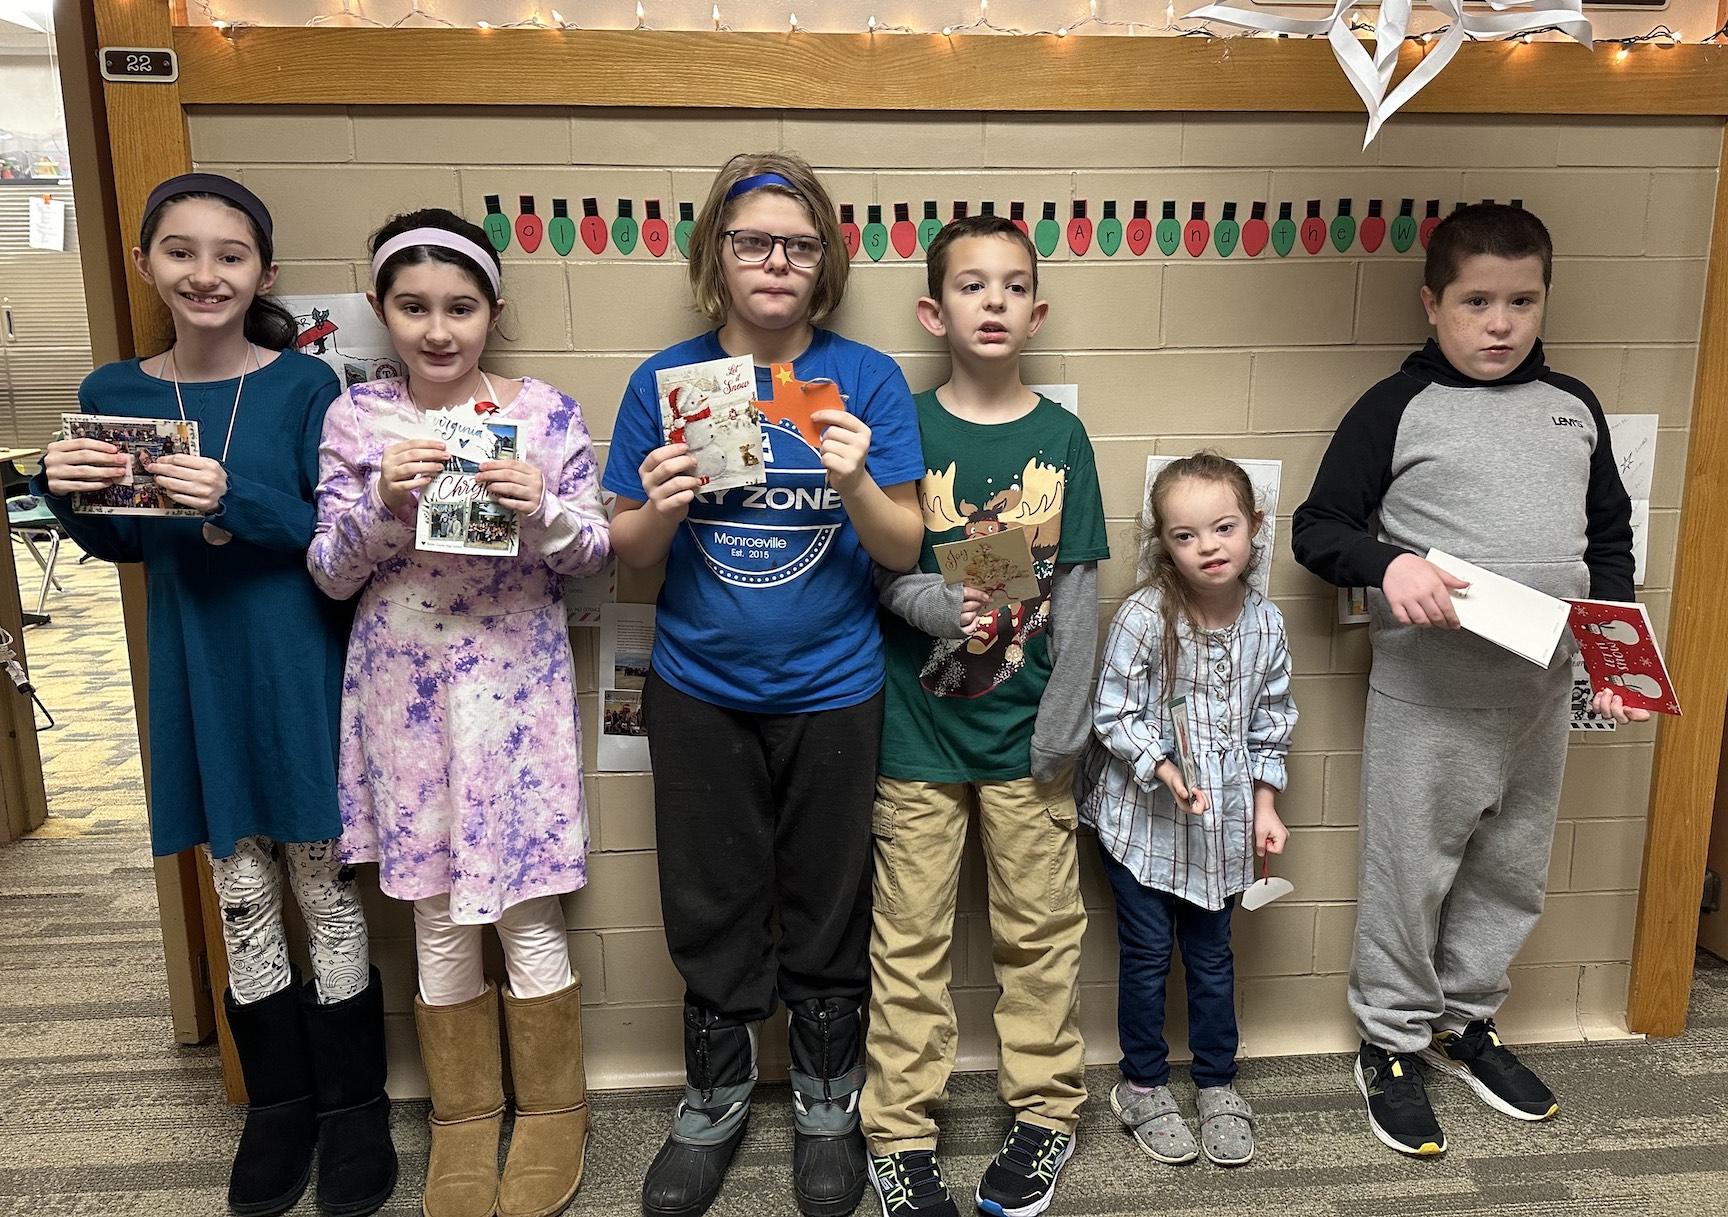 Nina Parrendo, Izzy Parrendo, Jackie LeCuyer, Kyle Hilgert, Charlotte Teoli, and Alex Ginsburg hold some of the cards they received in the mail